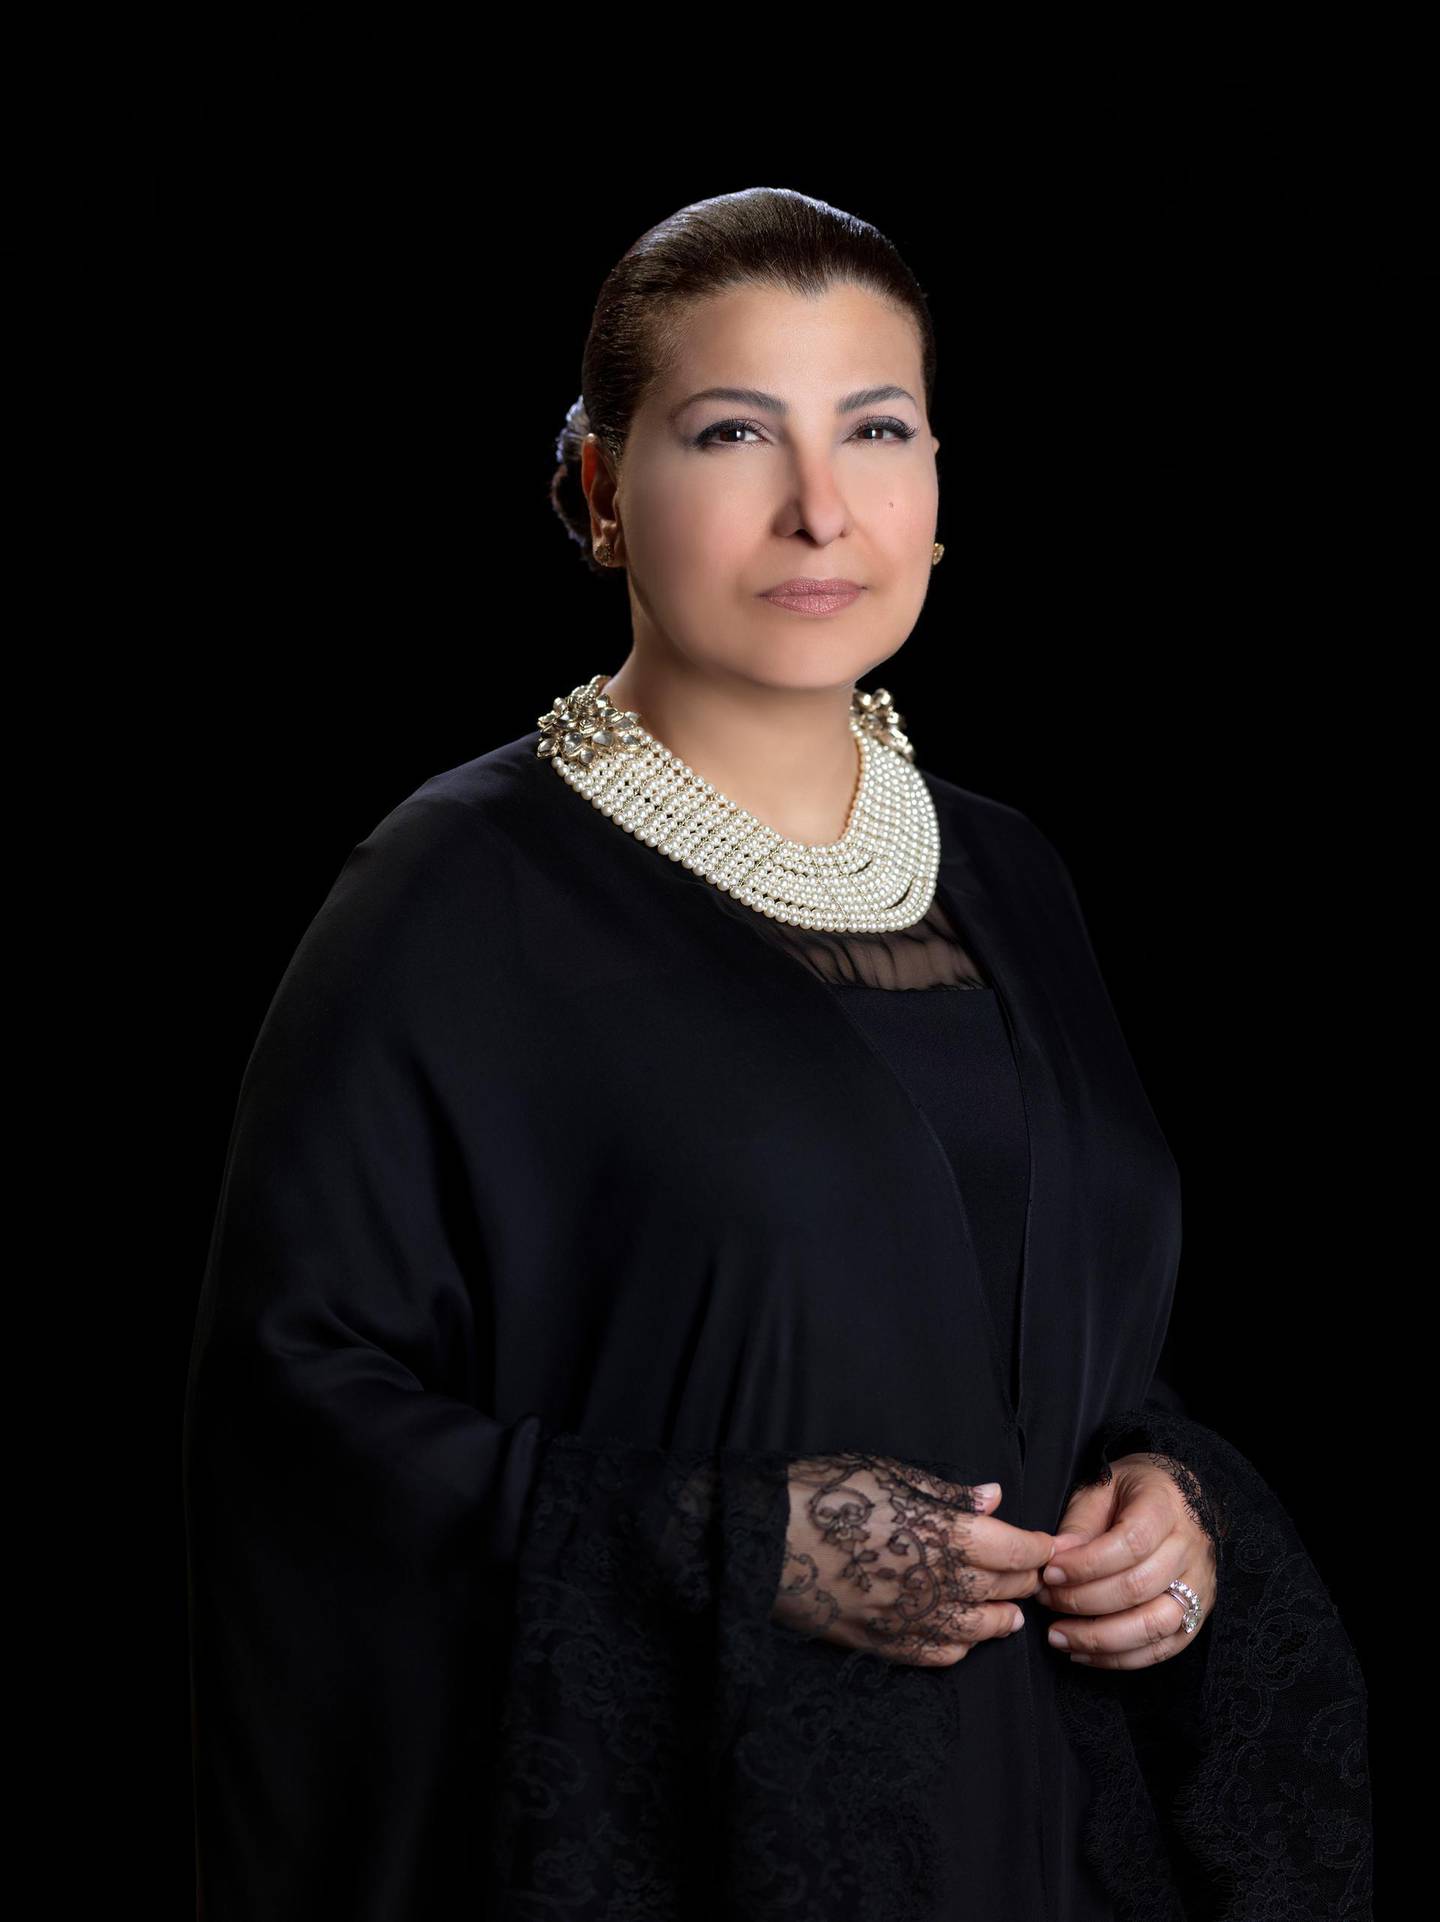 Huda Alkhamis-Kanoo set up the Abu Dhabi Music and Arts Foundation in her living room 20 years ago